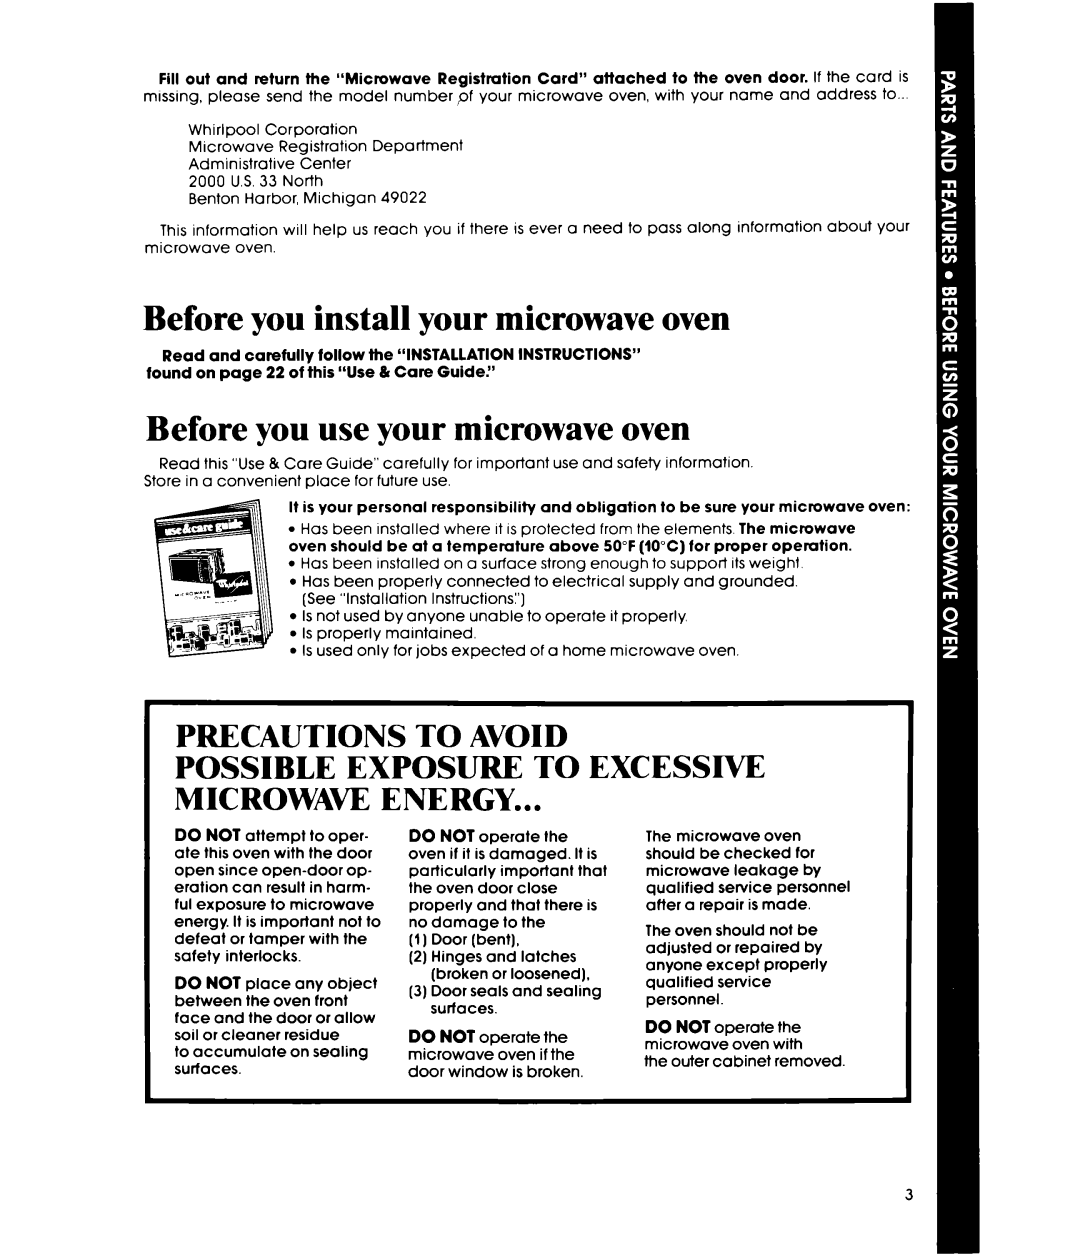 Whirlpool MW8600XR manual Before you install your microwave oven, Before you use your microwave oven, Precautions To Avoid 